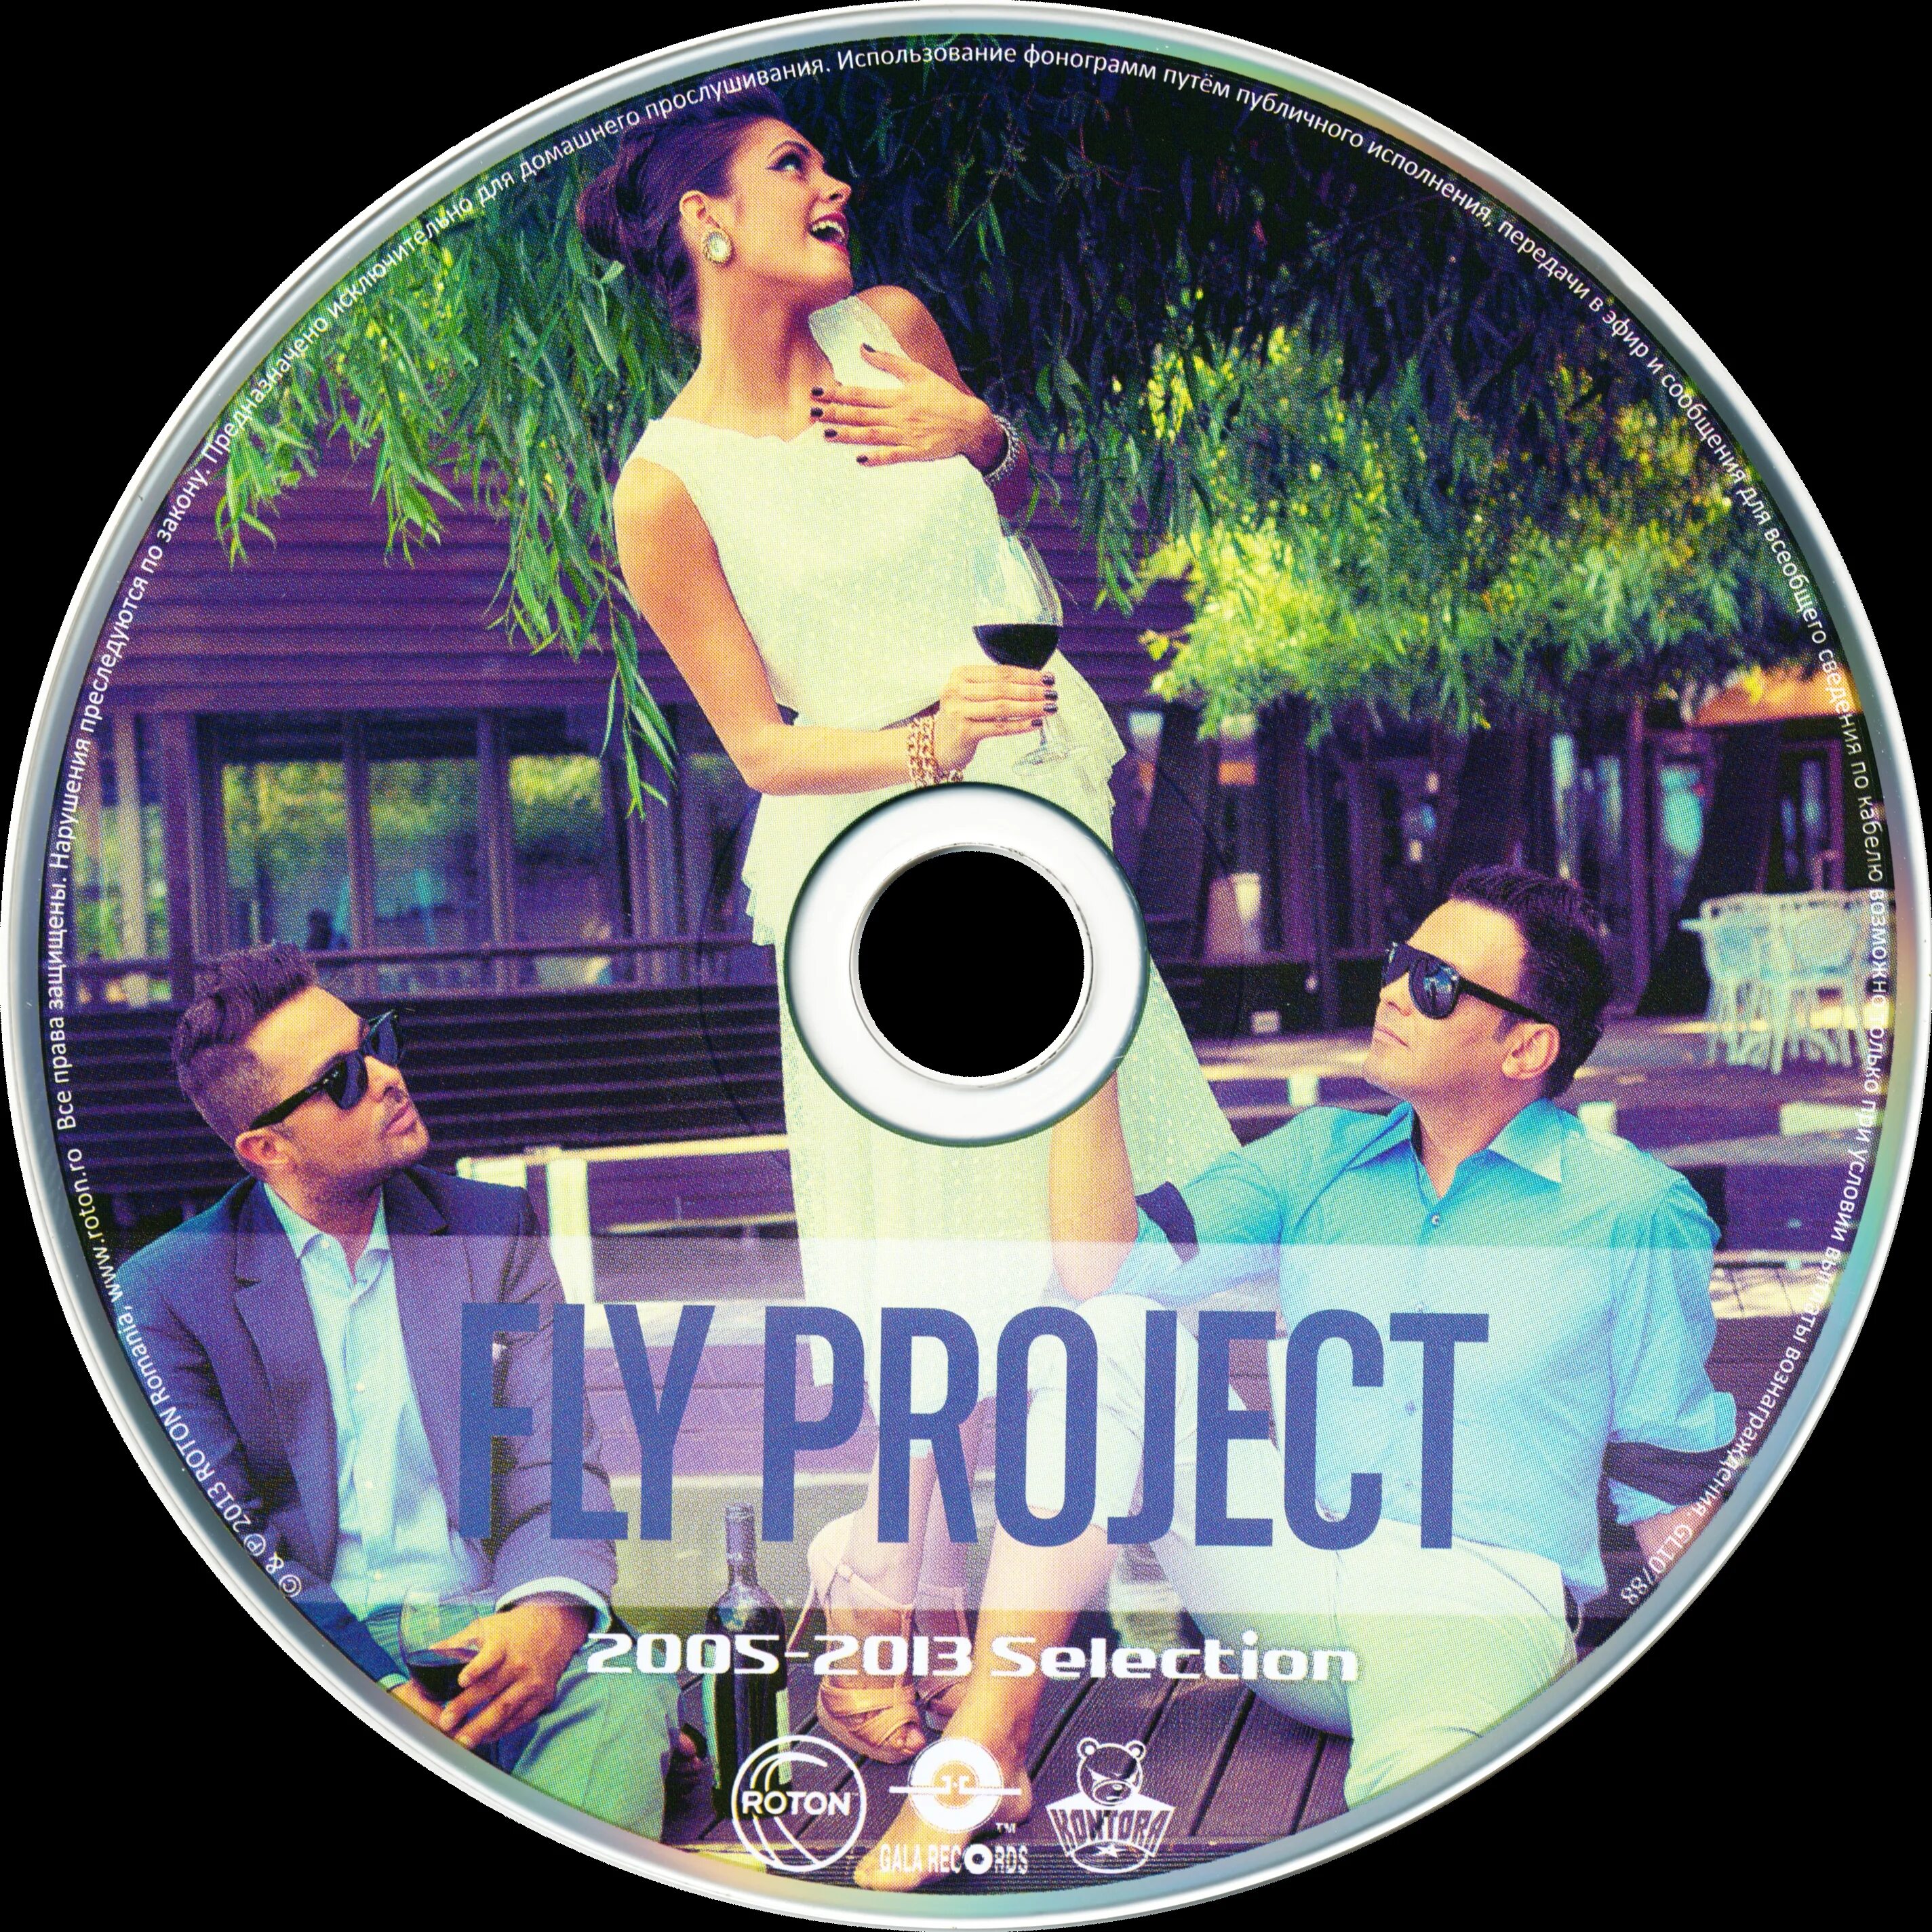 Fly Project - back in my Life. Fly Project. 2005-2013 Selection. Back in ticascasino Jeff. Лока лока песня Fly Project обложка.